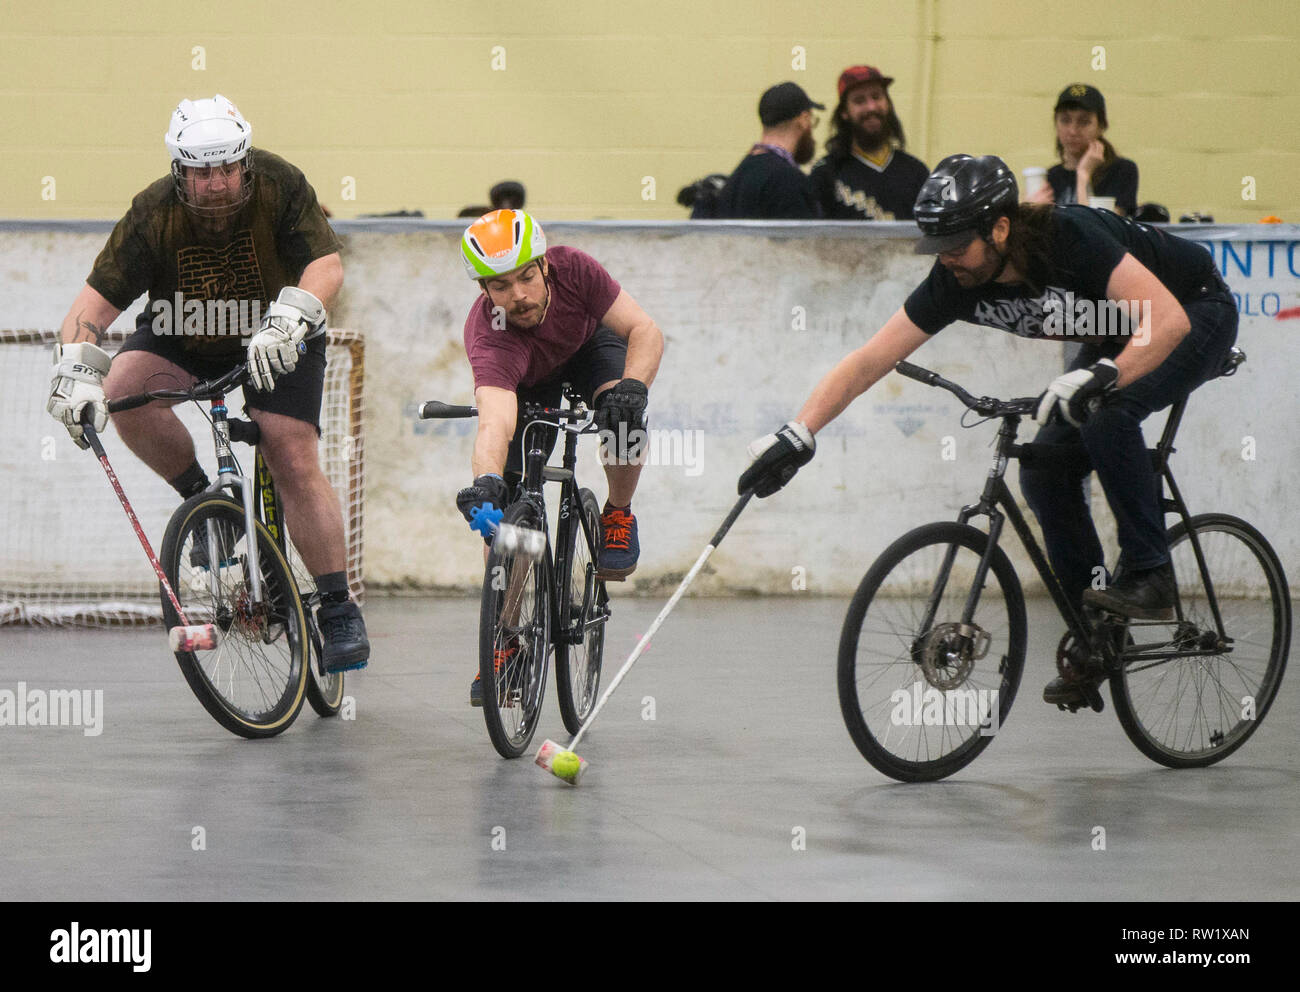 Toronto, Canada. 3rd Mar, 2019. Participants compete during the Great Lakes Winter Classic Bike Polo Tournament in Toronto, Canada, March 3, 2019. Bike Polo is a team sport combining the bicycle rider's skills with the fast-paced action of hockey. Credit: Zou Zheng/Xinhua/Alamy Live News Stock Photo